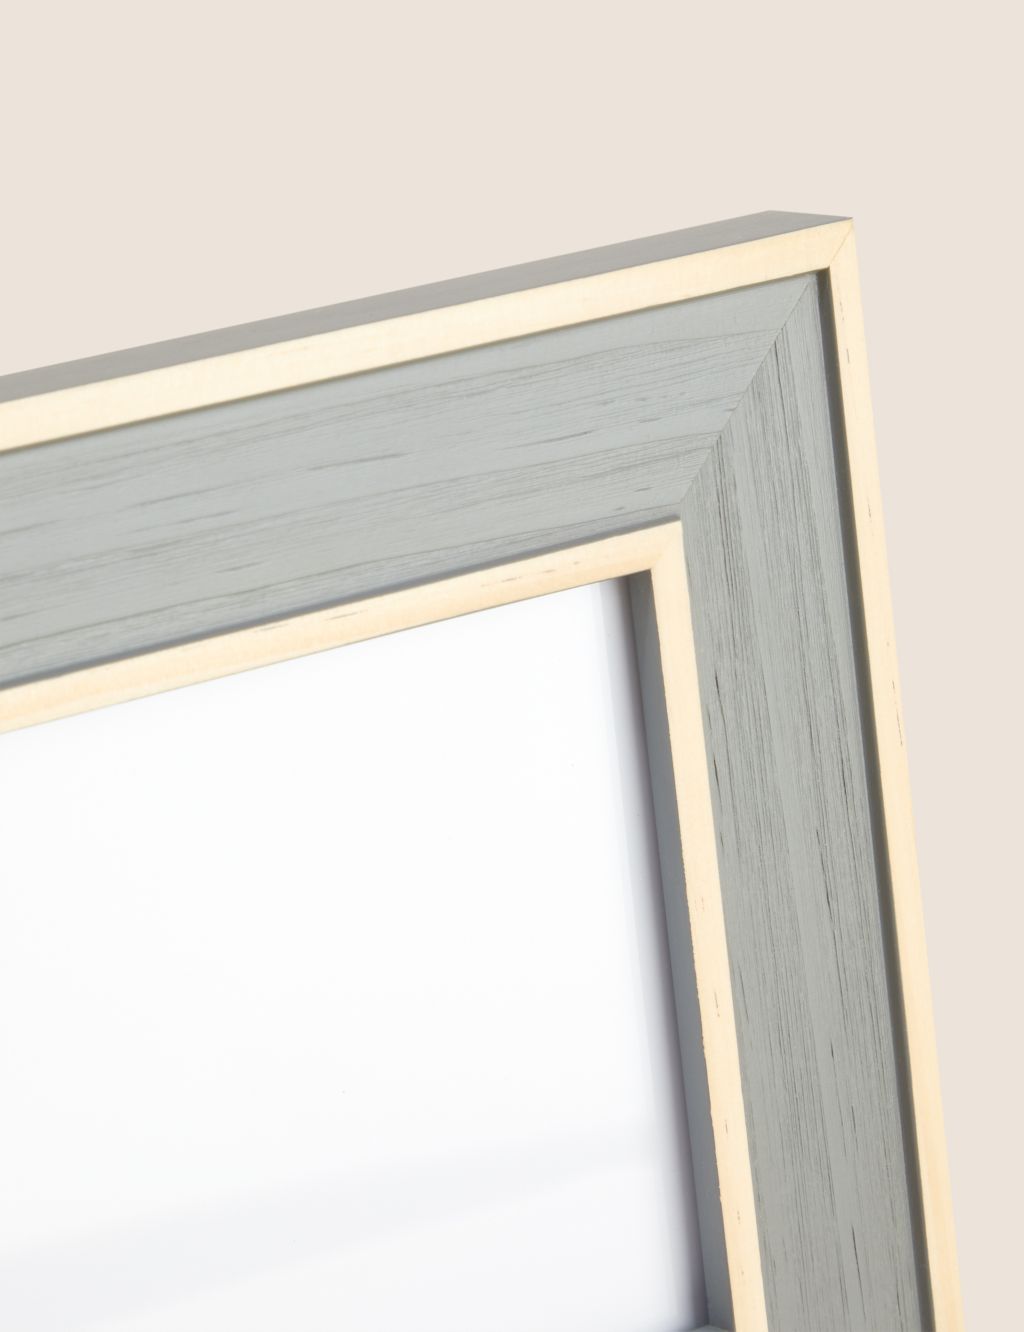 Two Tone Wood Photo Frame 4x6 inch image 3